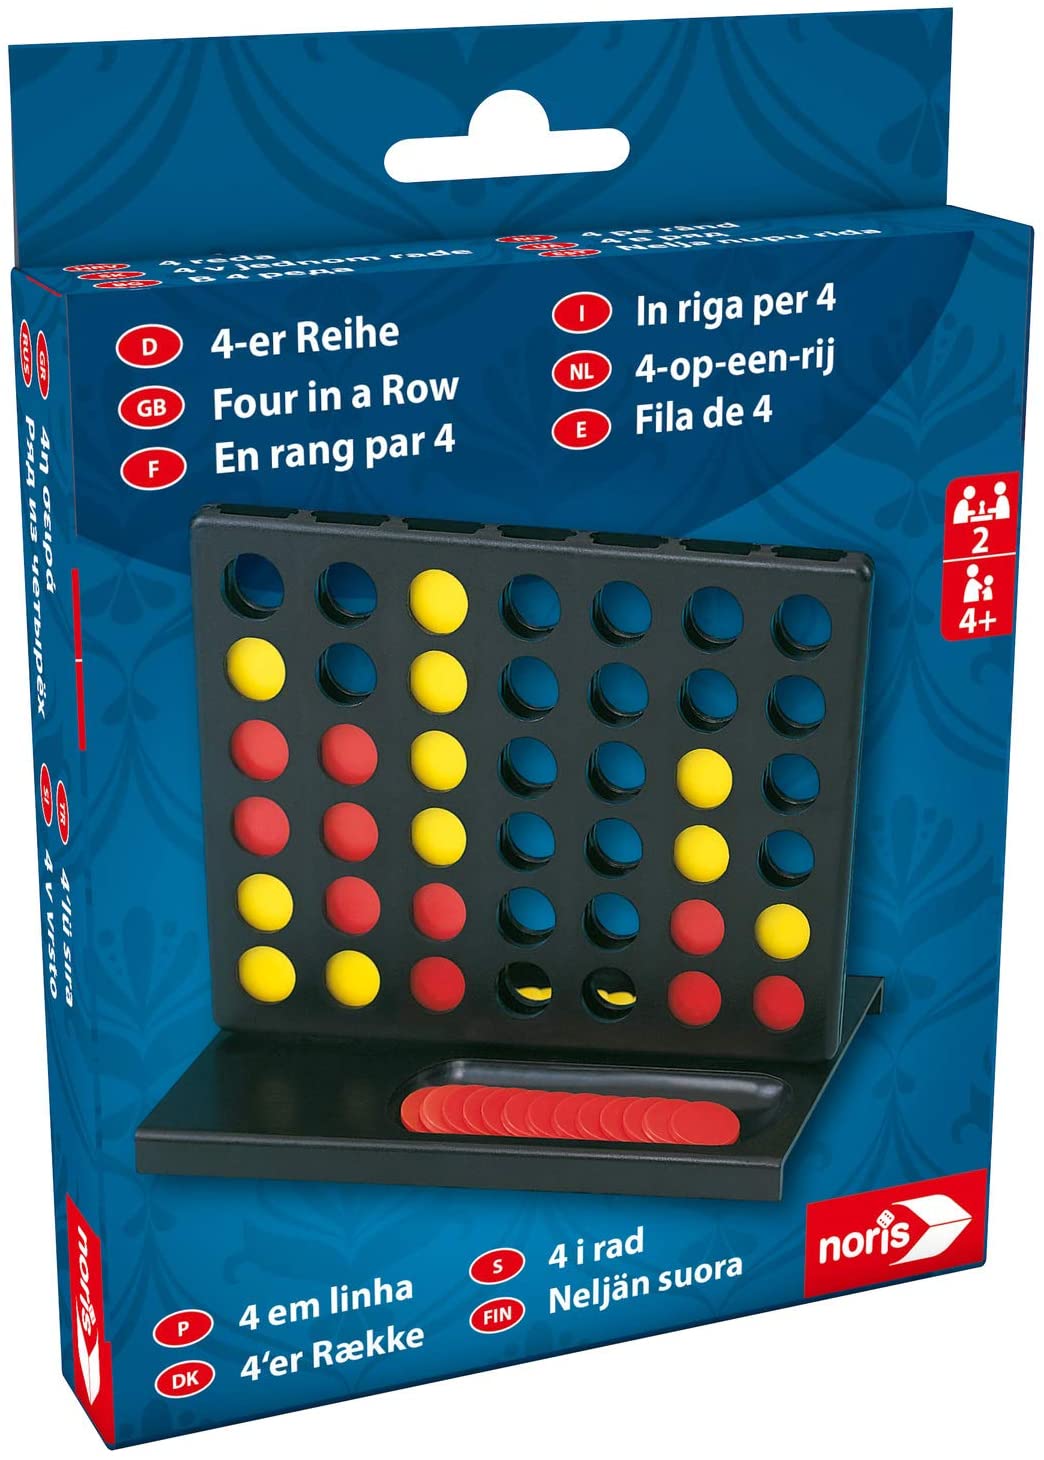 Noris 606101068 Noris 4 Series Action Game for the Whole Family from 4 Year